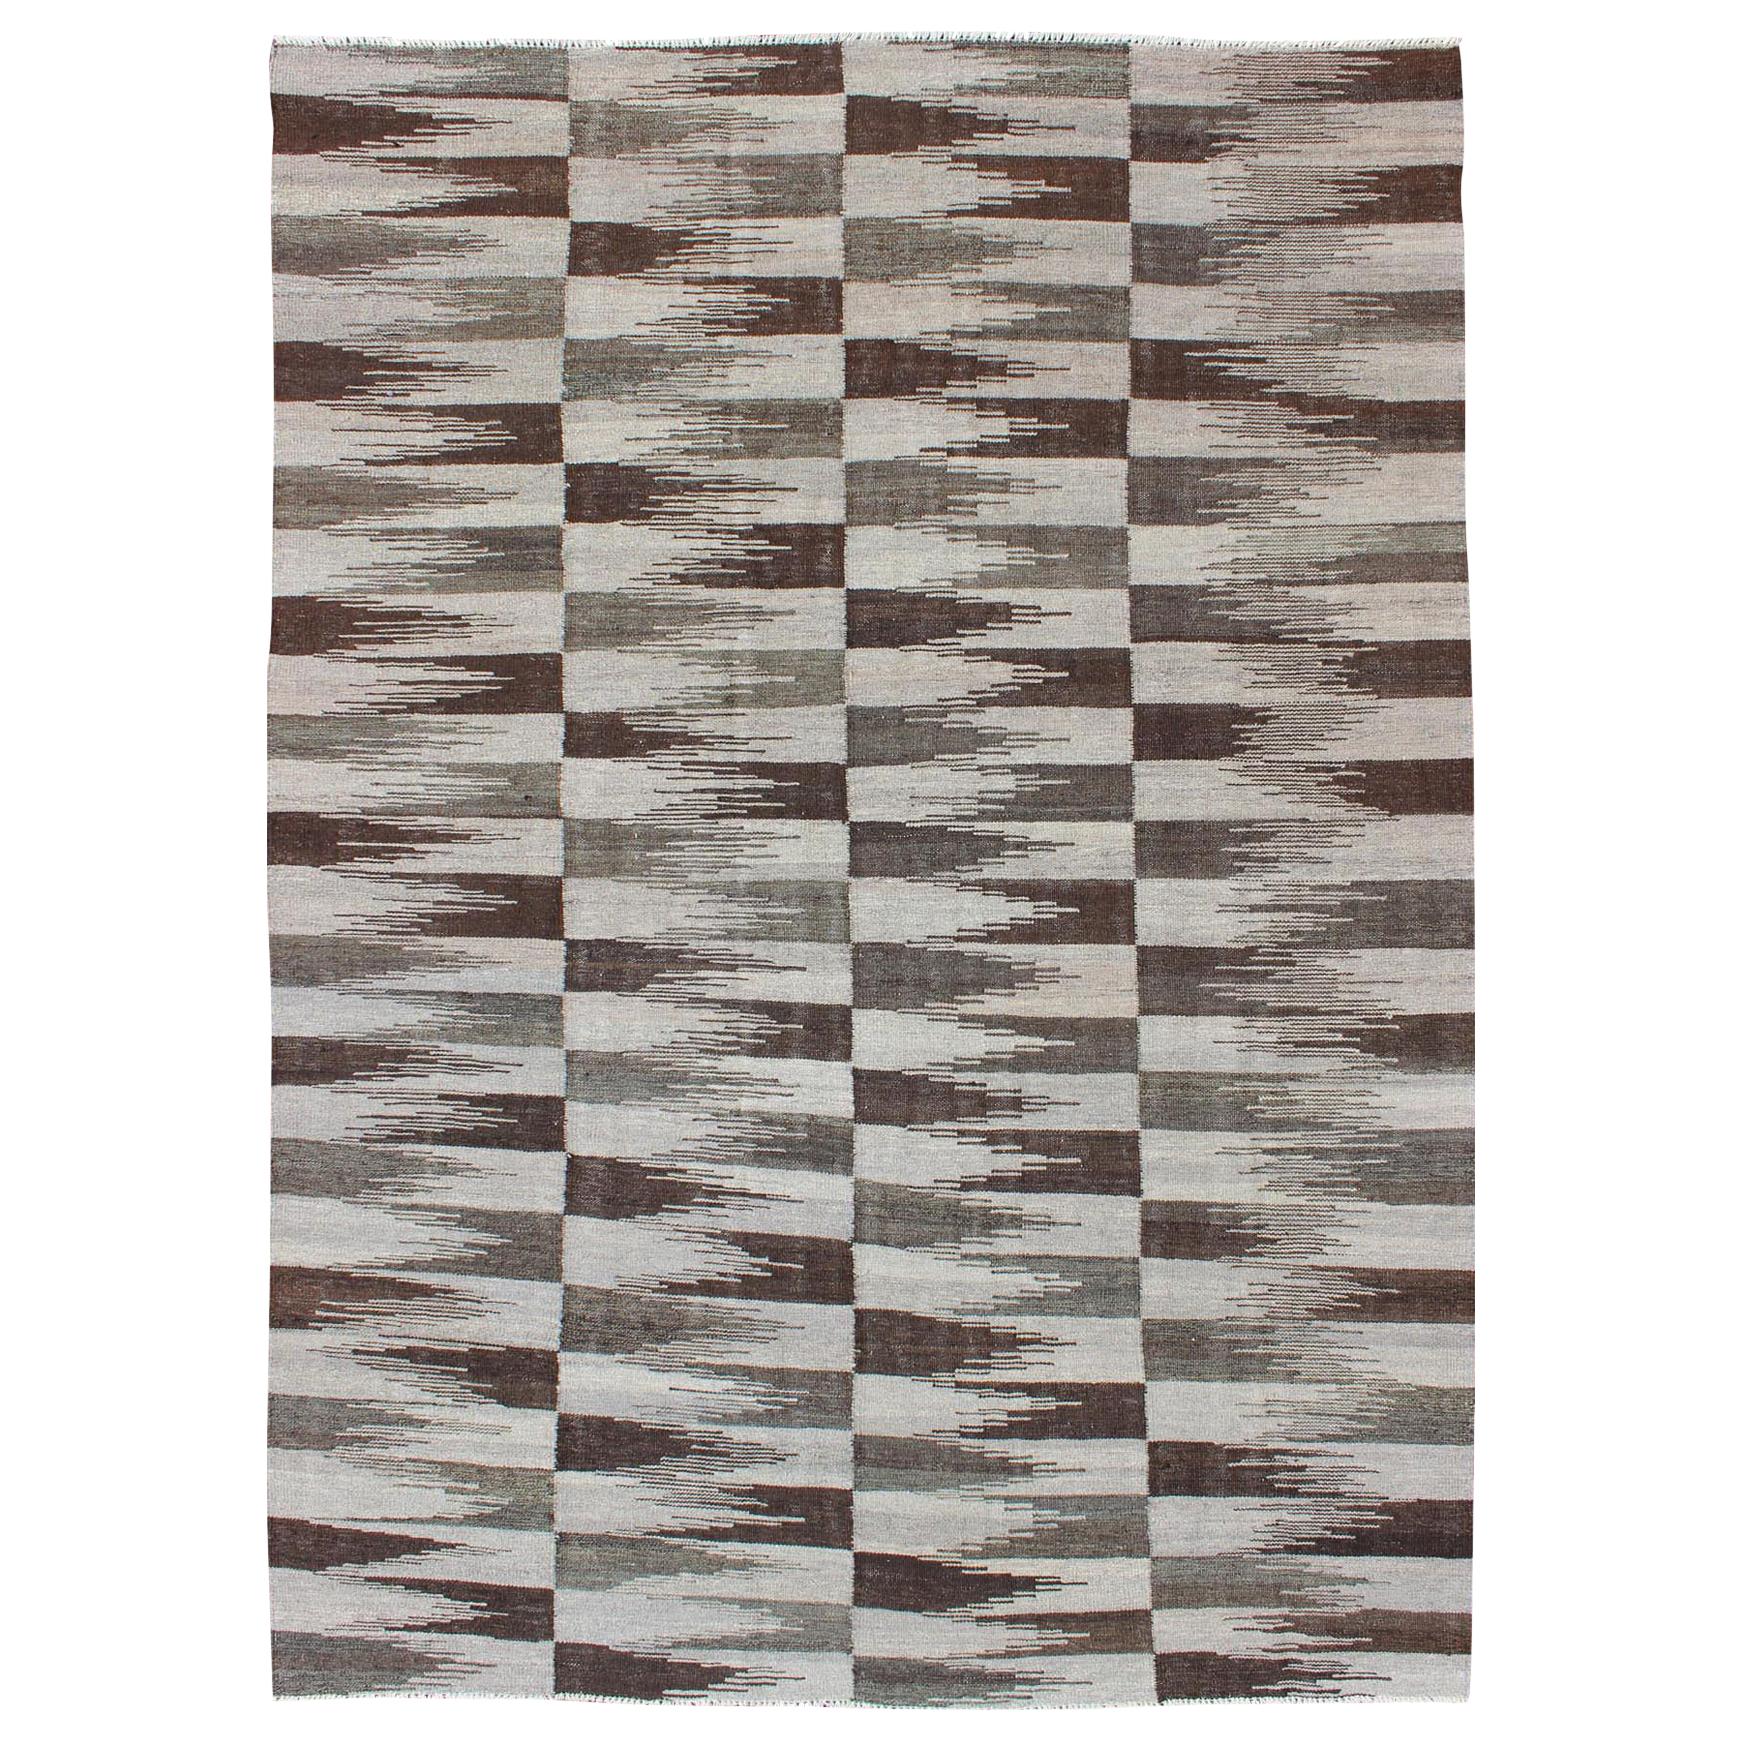  Fine Flat weave Modern Kilim in Neutrals, Browns and Greens Colors